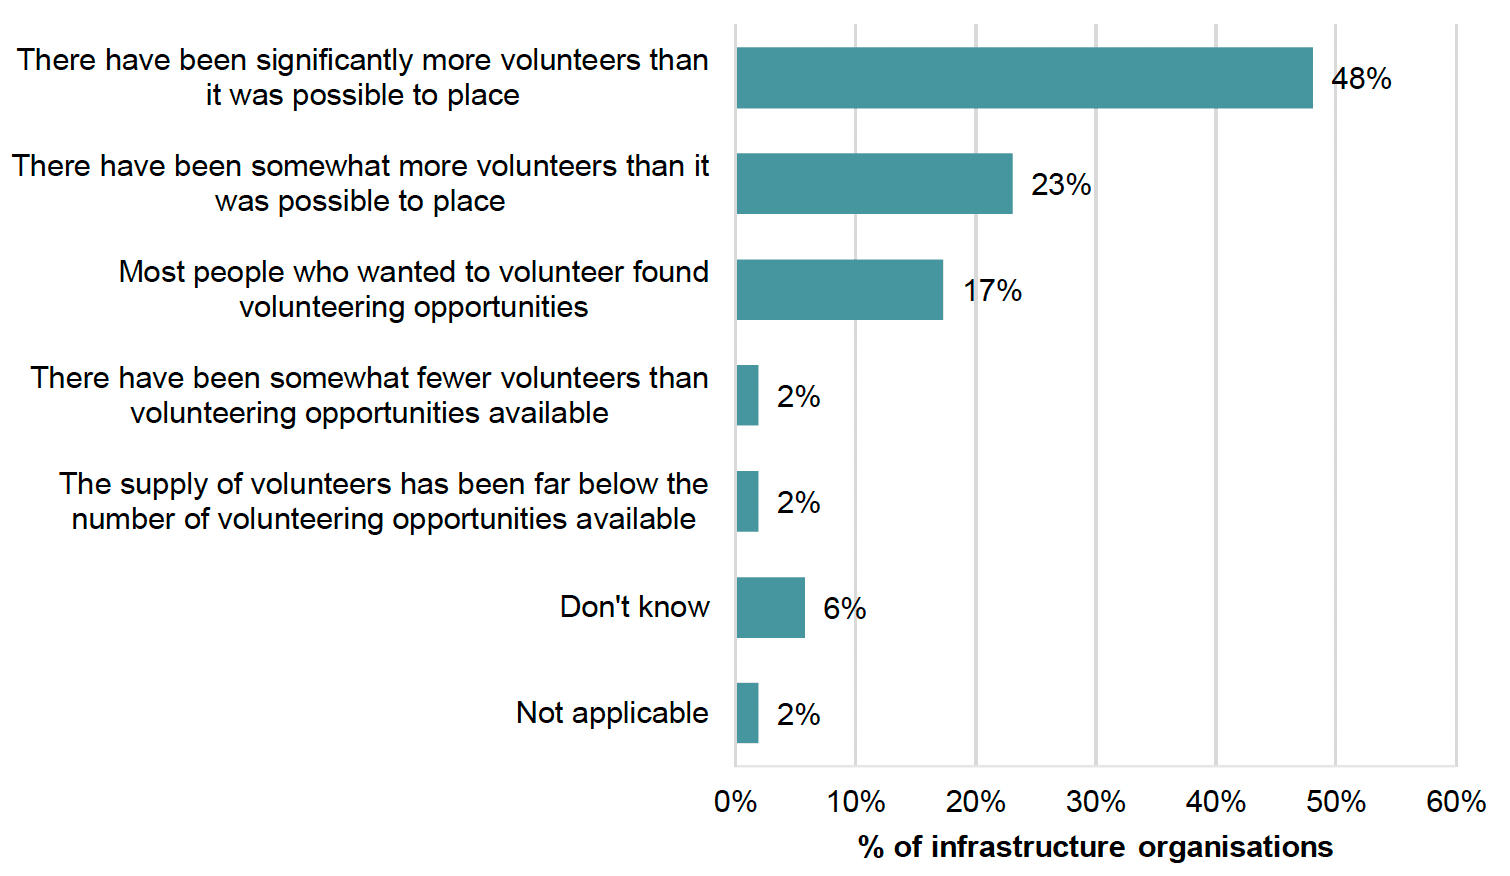 Chart showing infrastructure organisation views on the volunteer supply during the COVID-19 pandemic